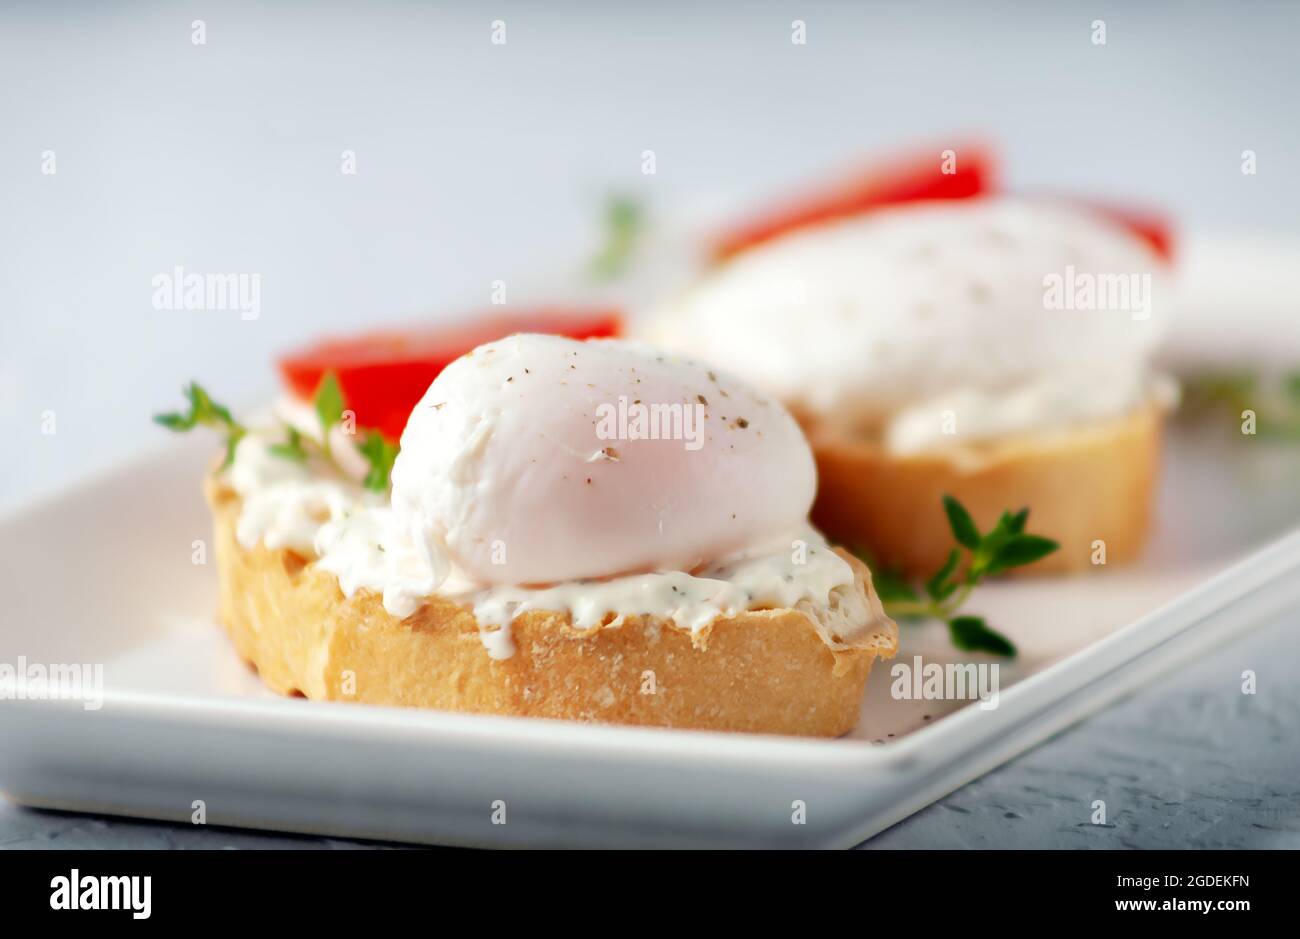 Tasty breakfast. Poached egg with cheese paste and herbs. Healthy food Stock Photo